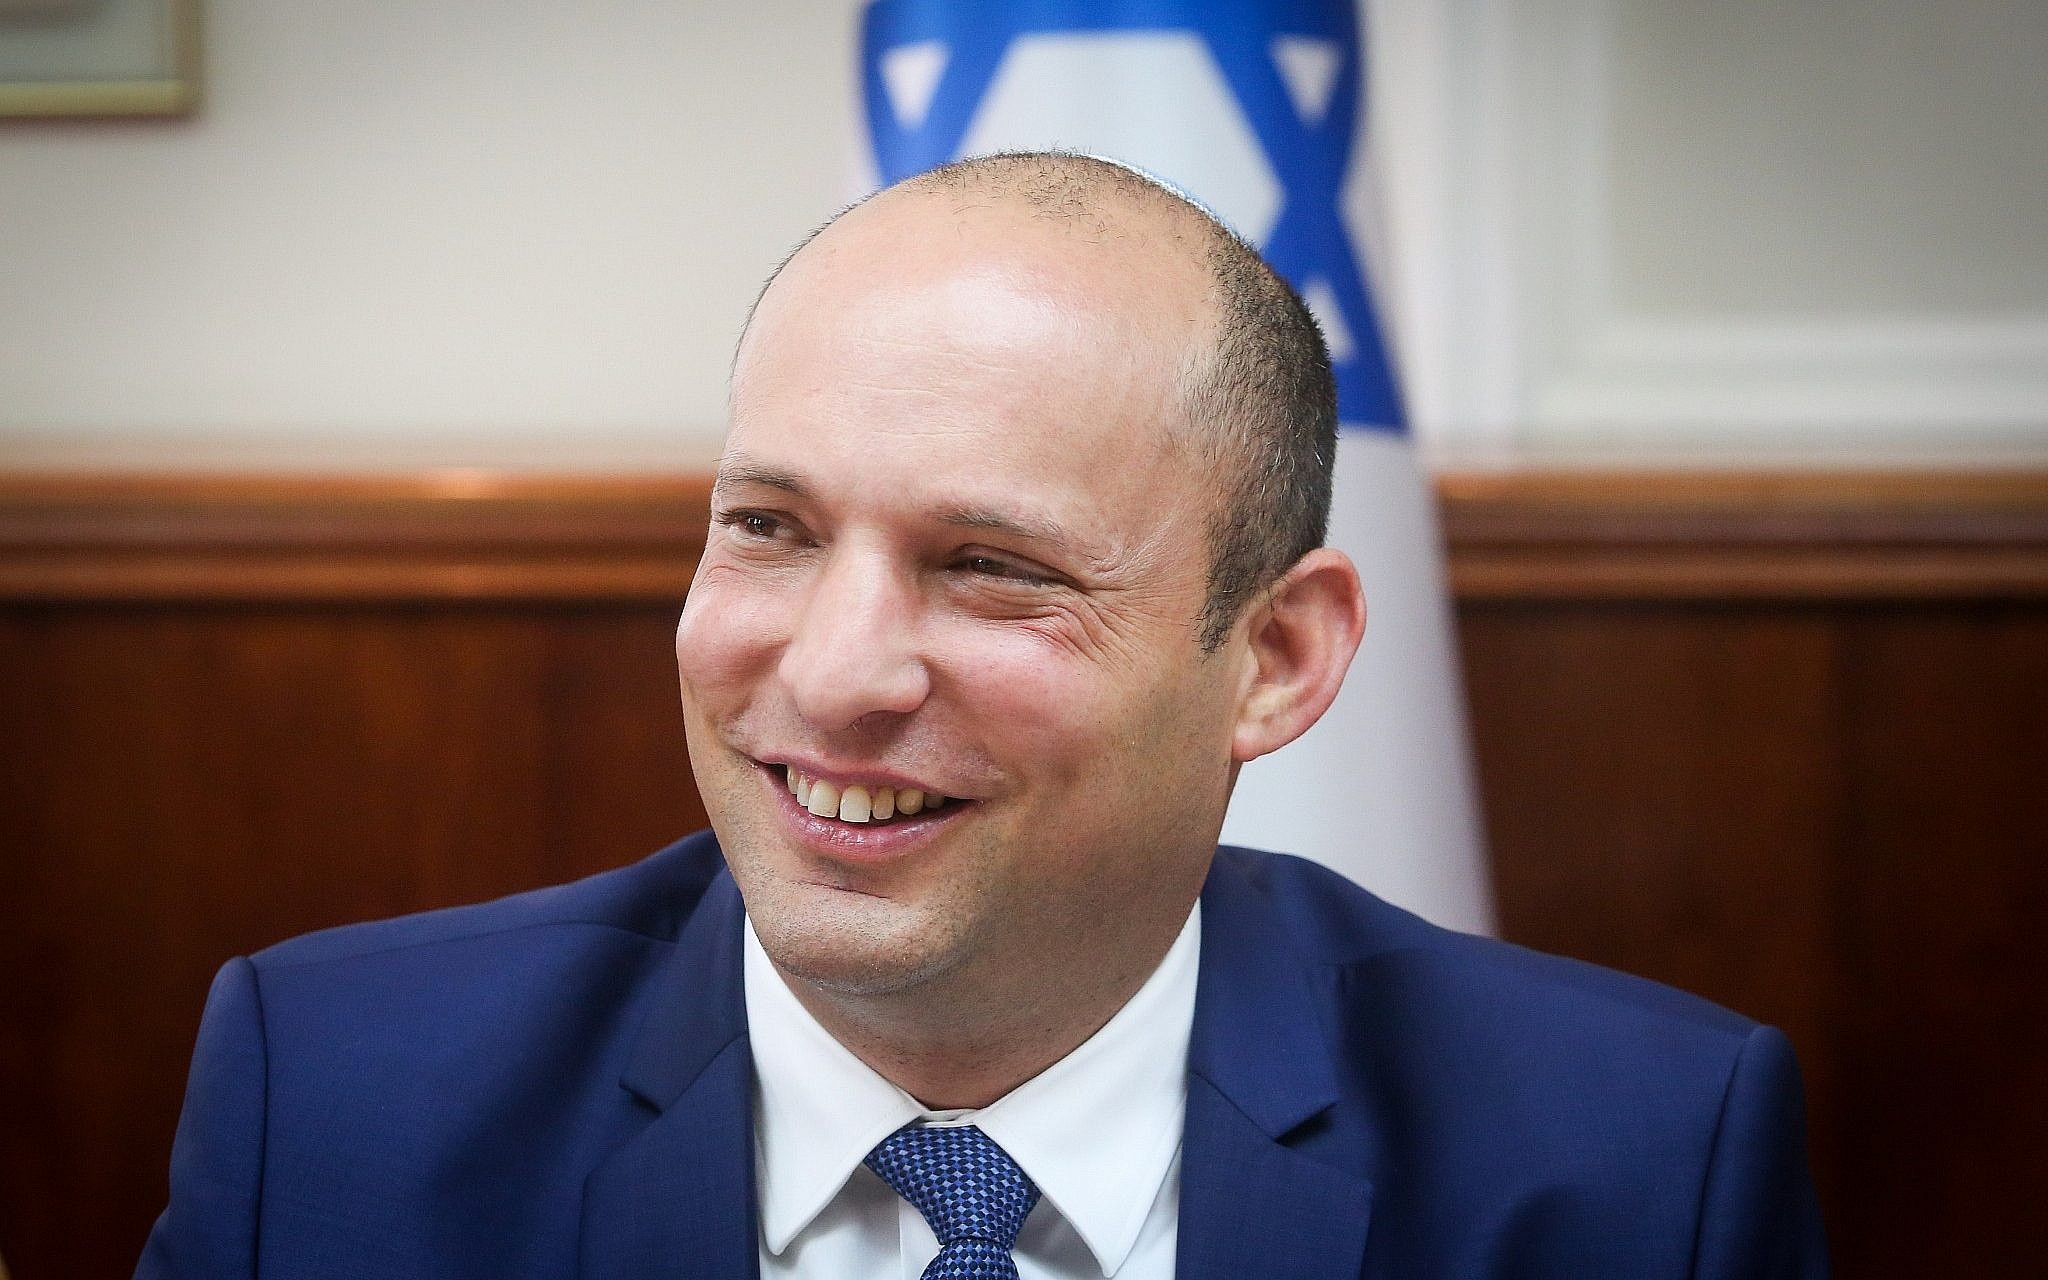 Benjamin Netanyahu’s 12-year tenure as Israeli prime minister has come to an end, as the country’s parliament on Sunday approved a new coalition government led by right-wing nationalist Naftali Bennett.